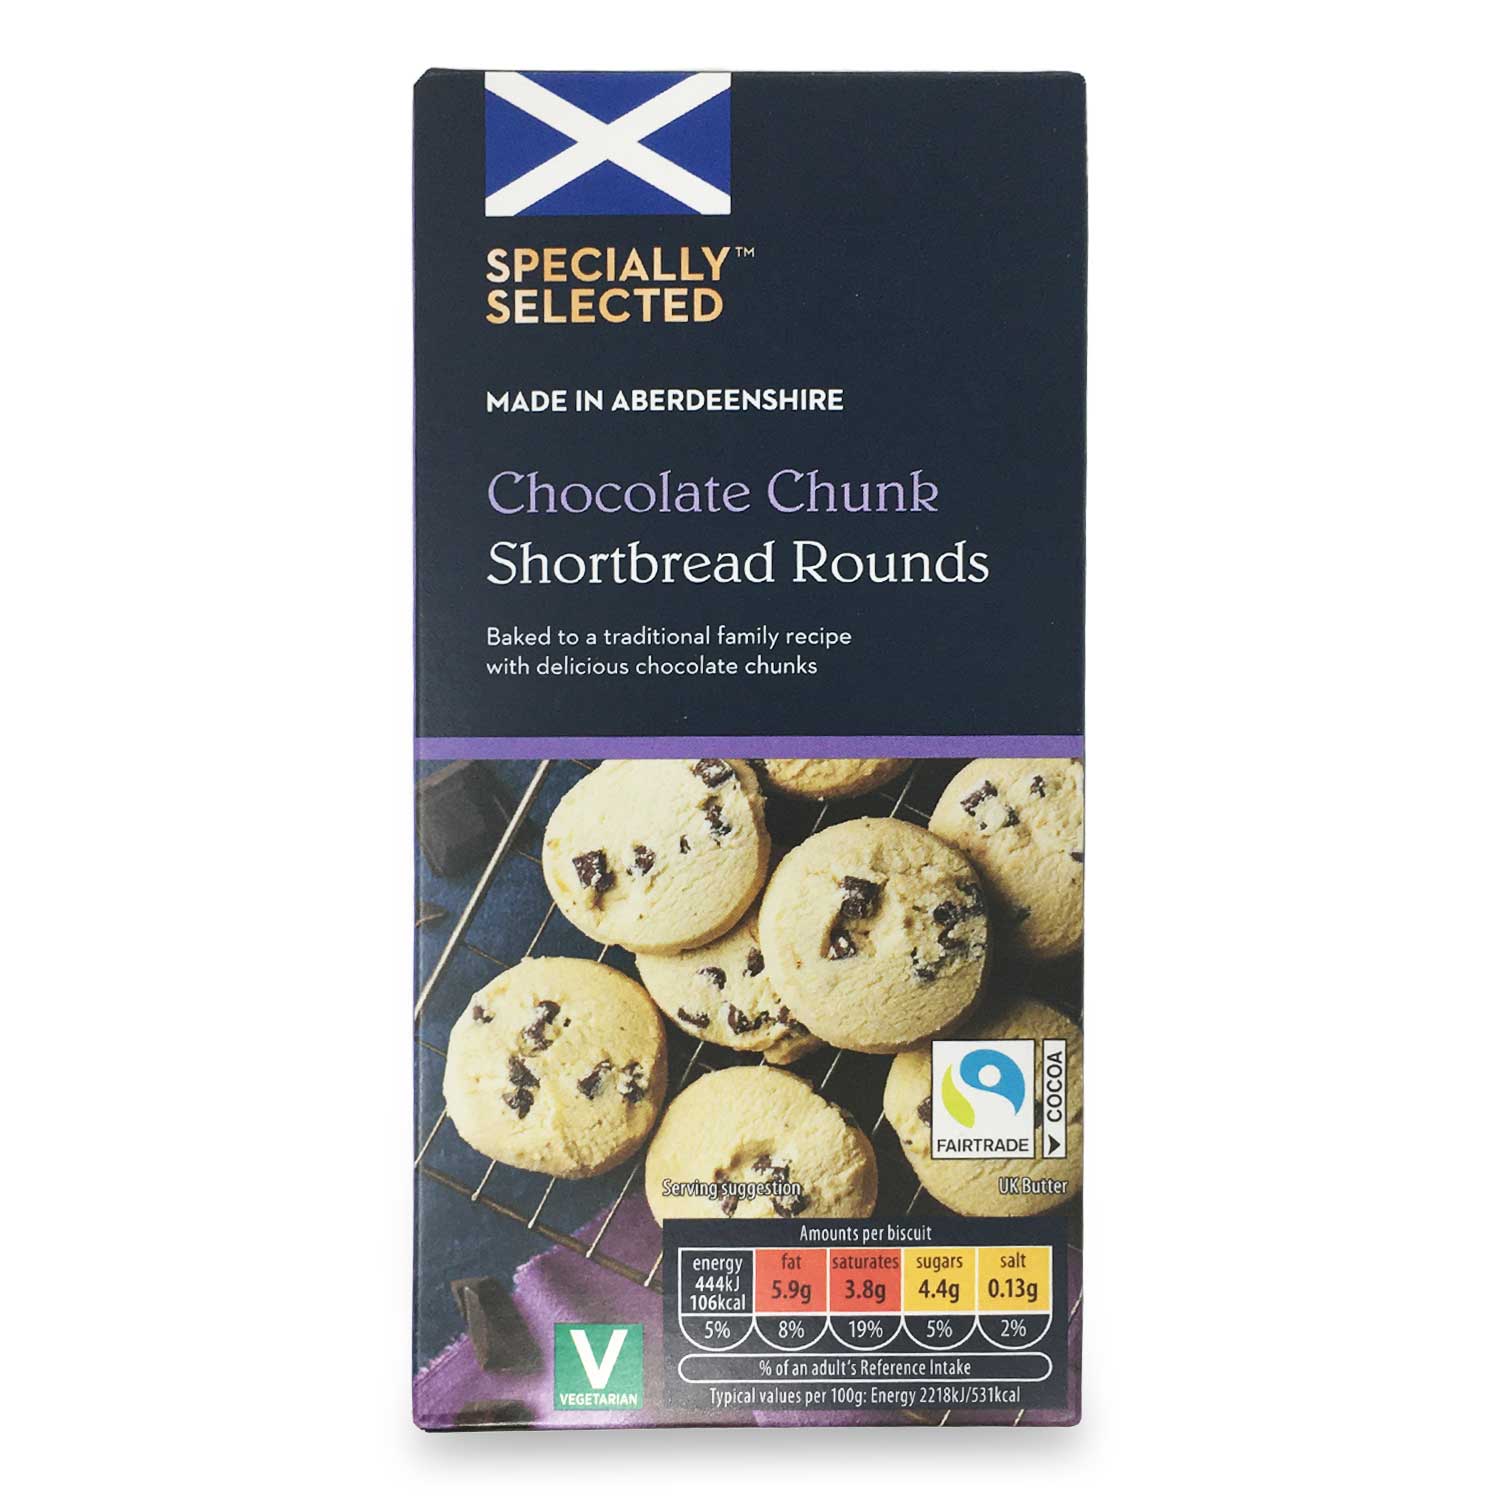 Specially Selected Scottish Chocolate Chunk Scottish Shortbread Rounds 160g